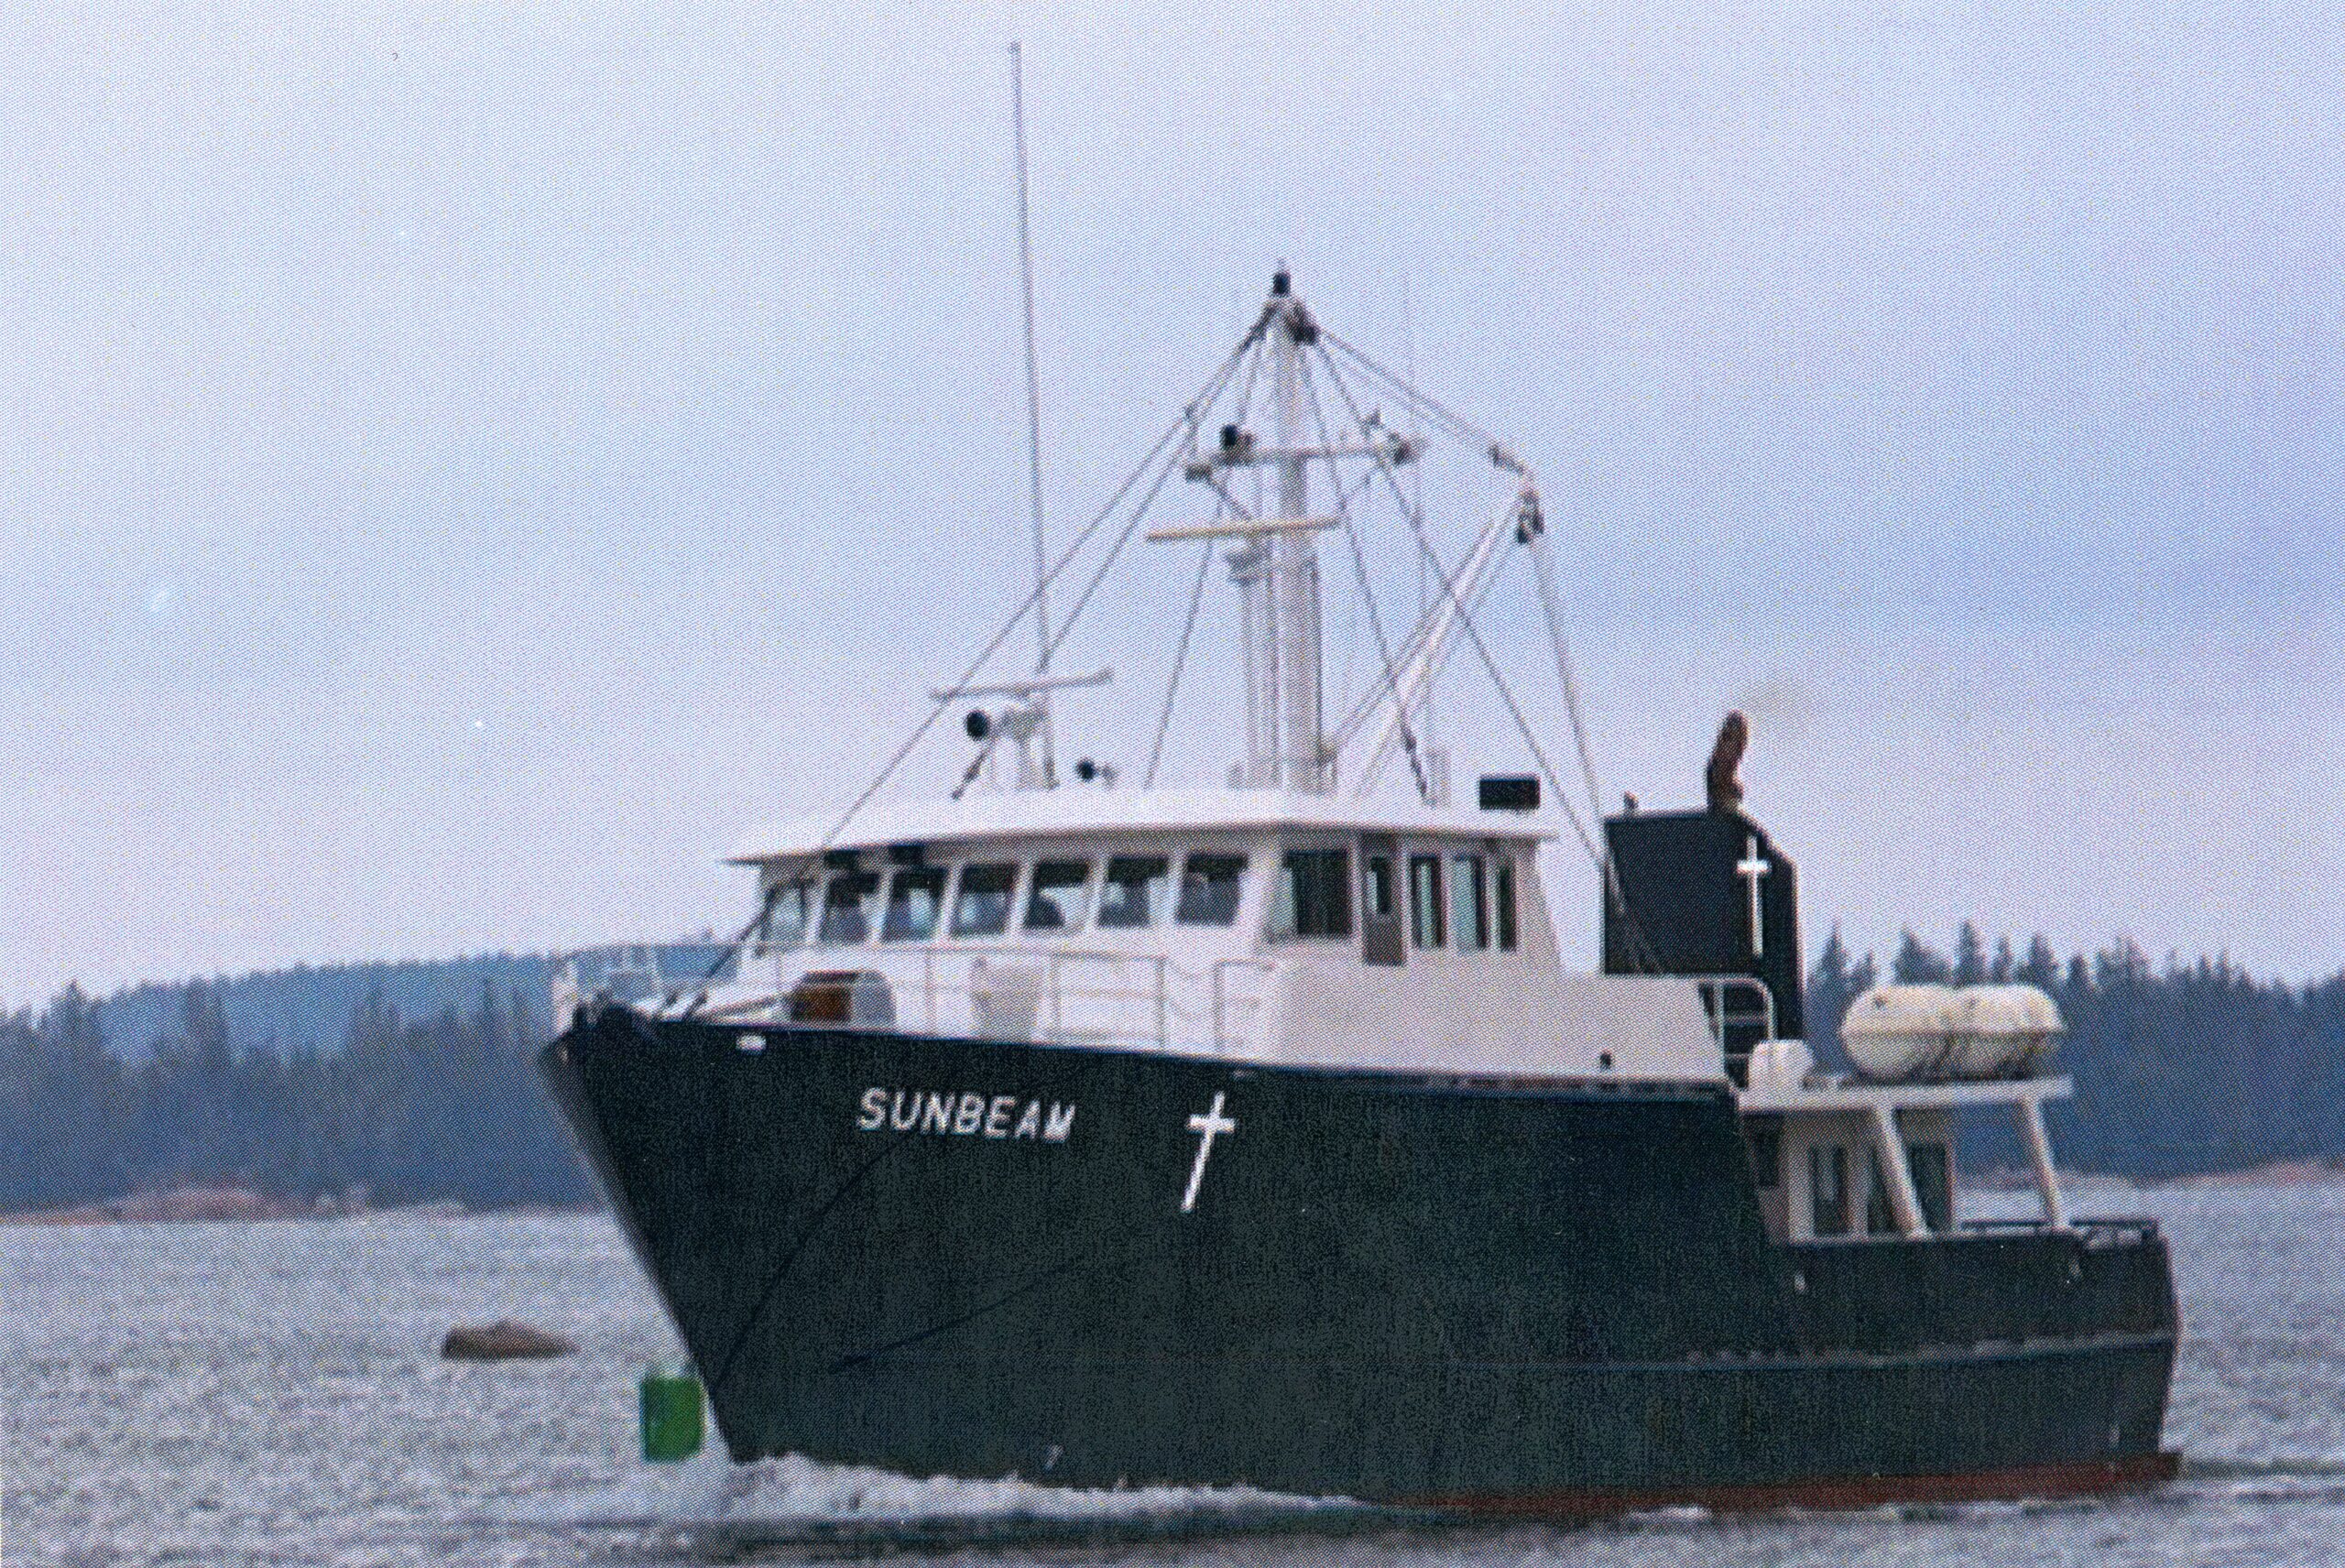 A color photo of a large boat